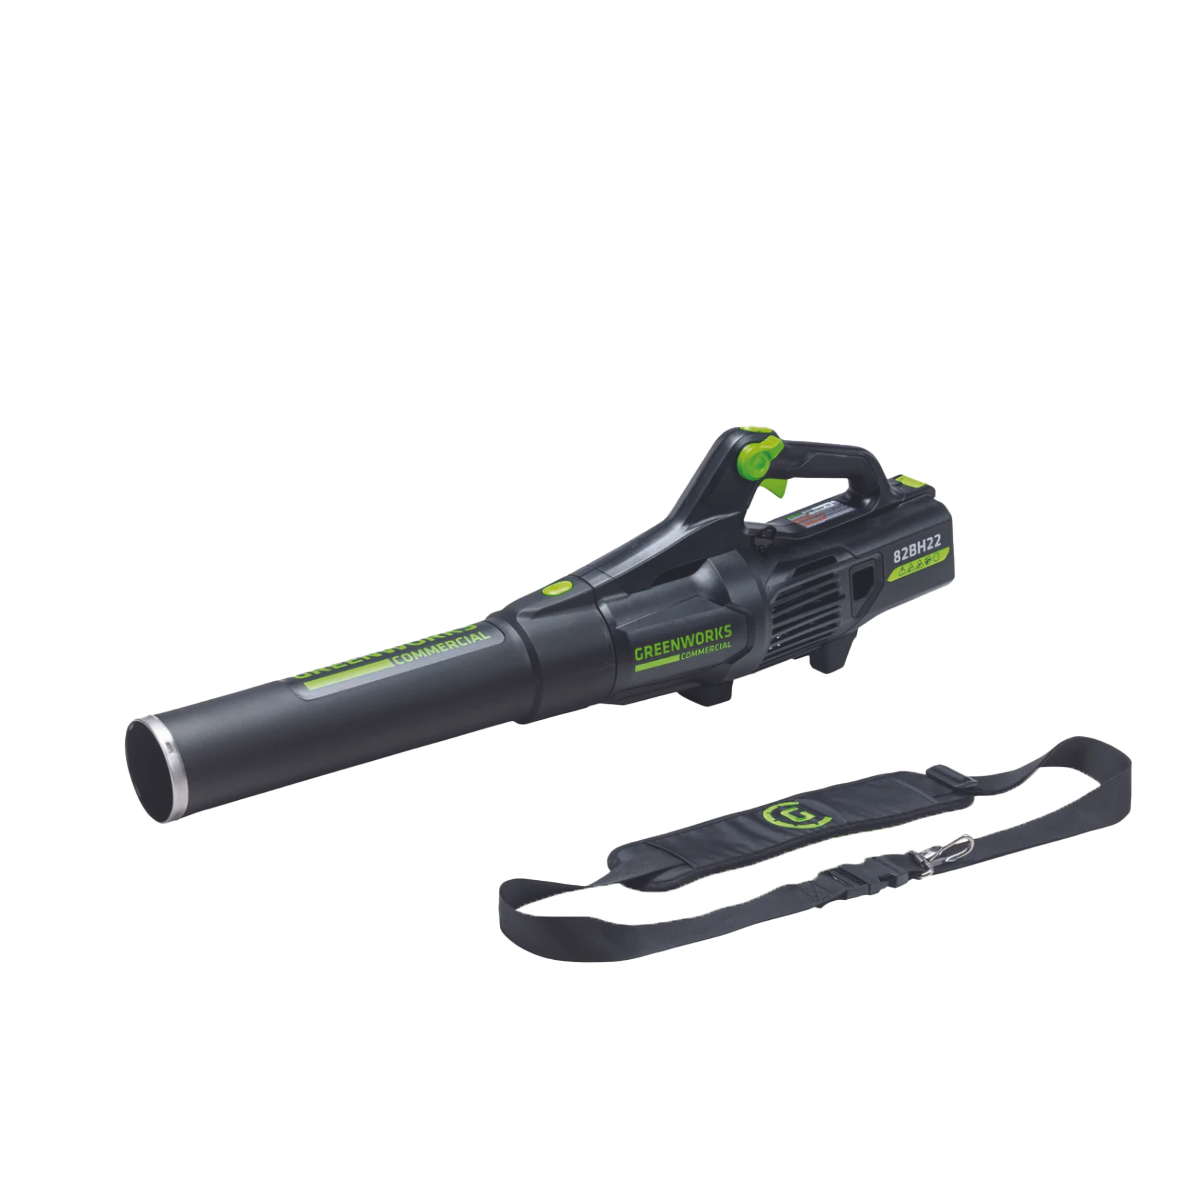 Greenworks 82V Brushless Axial Blower